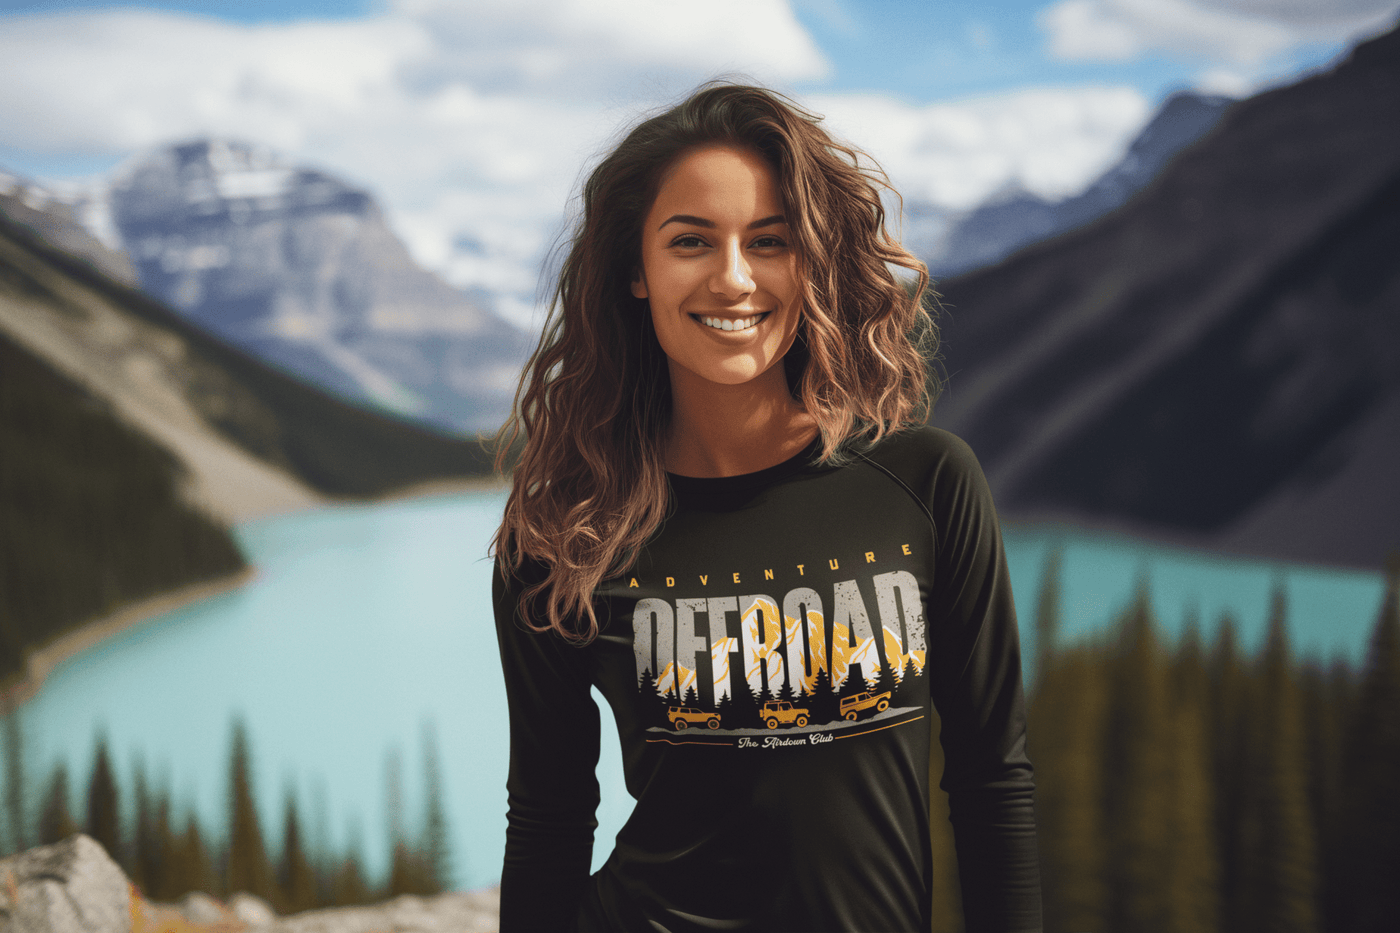 Black Longsleeve Tee Adventure Offroad-The Airdown Club - Goats Trail Off-Road Apparel Company